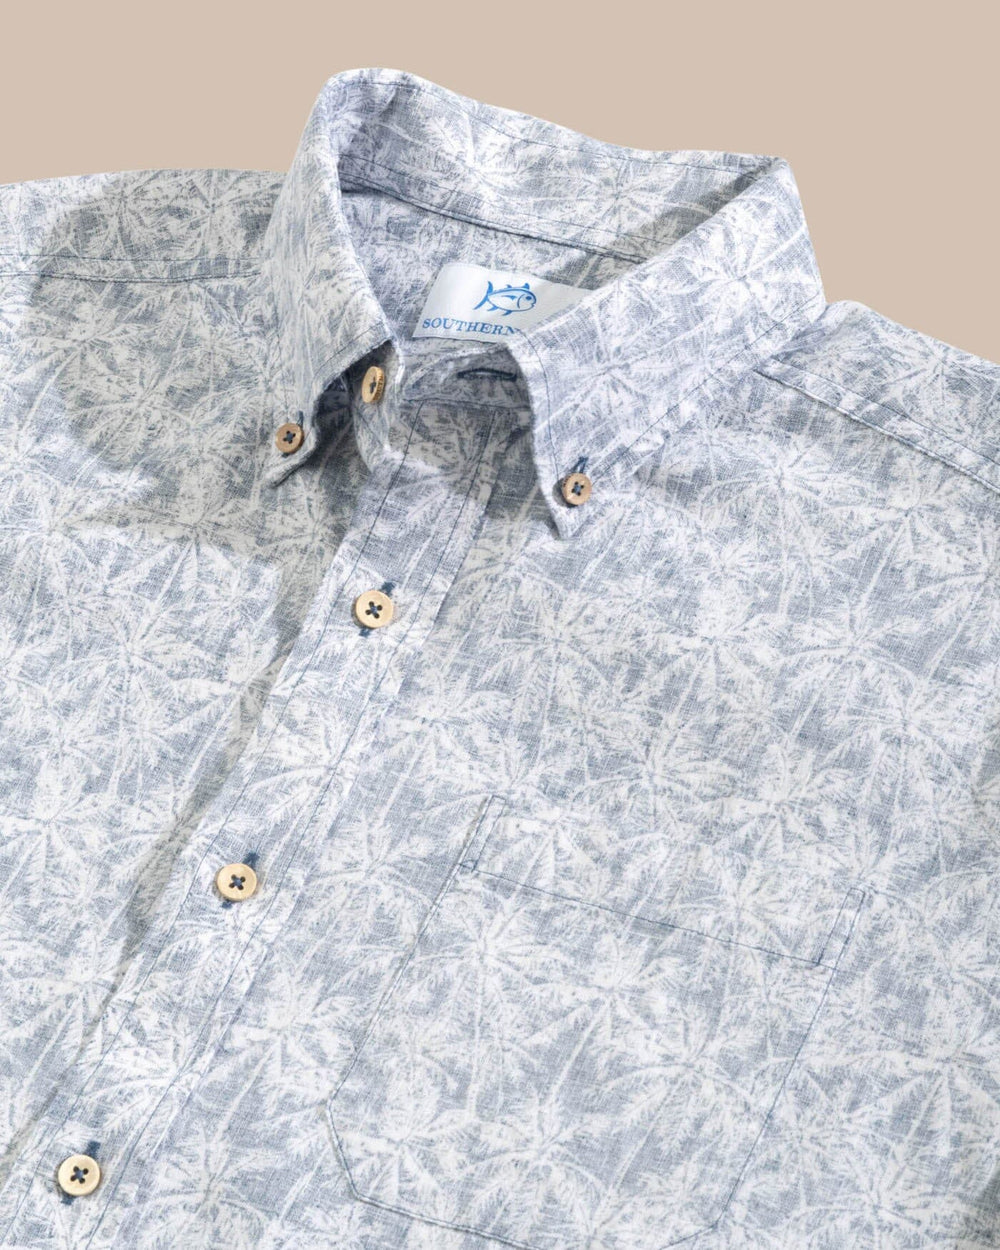 The detail view of the Southern Tide Linen Rayon Keep Palm and Carry On Print Sport Shirt by Southern Tide - Aged Denim